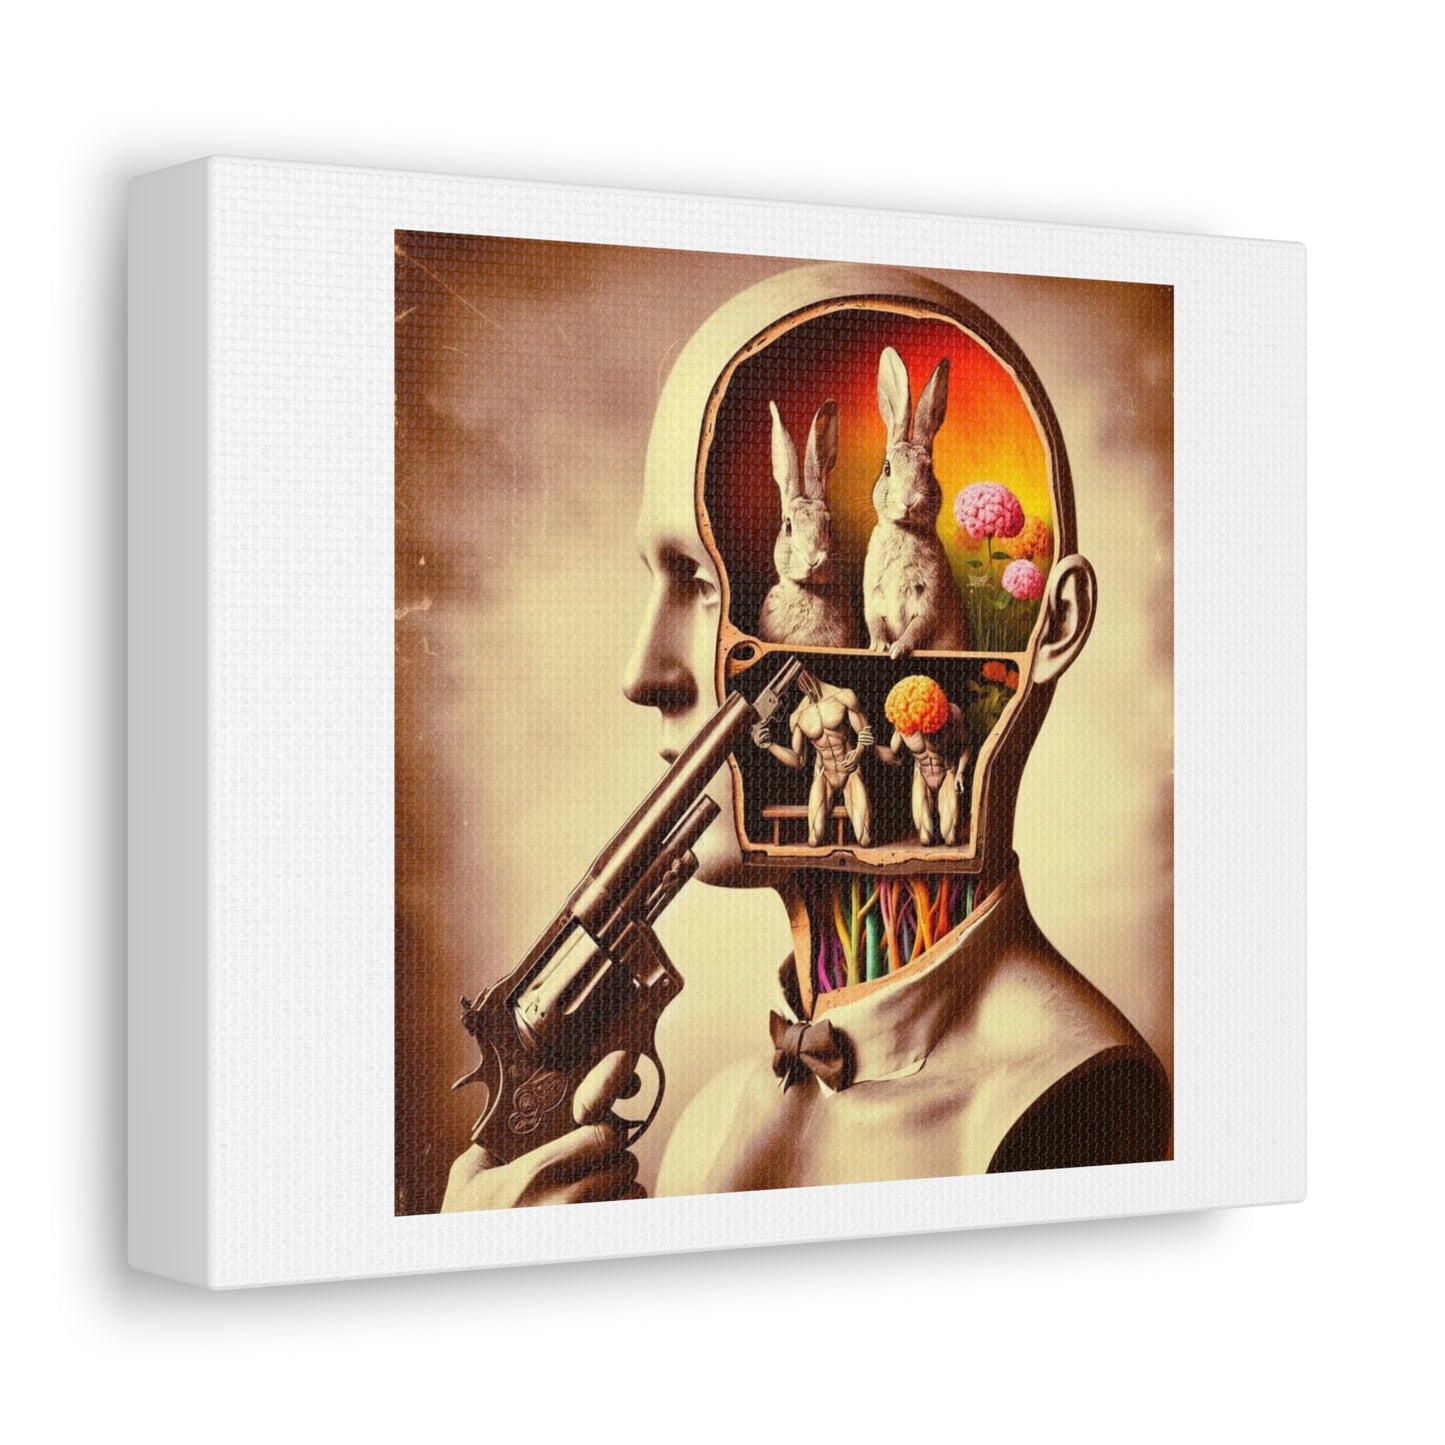 Absurdist Art, Cross Section of the Human Mind 'Designed by AI' Print on Canvas